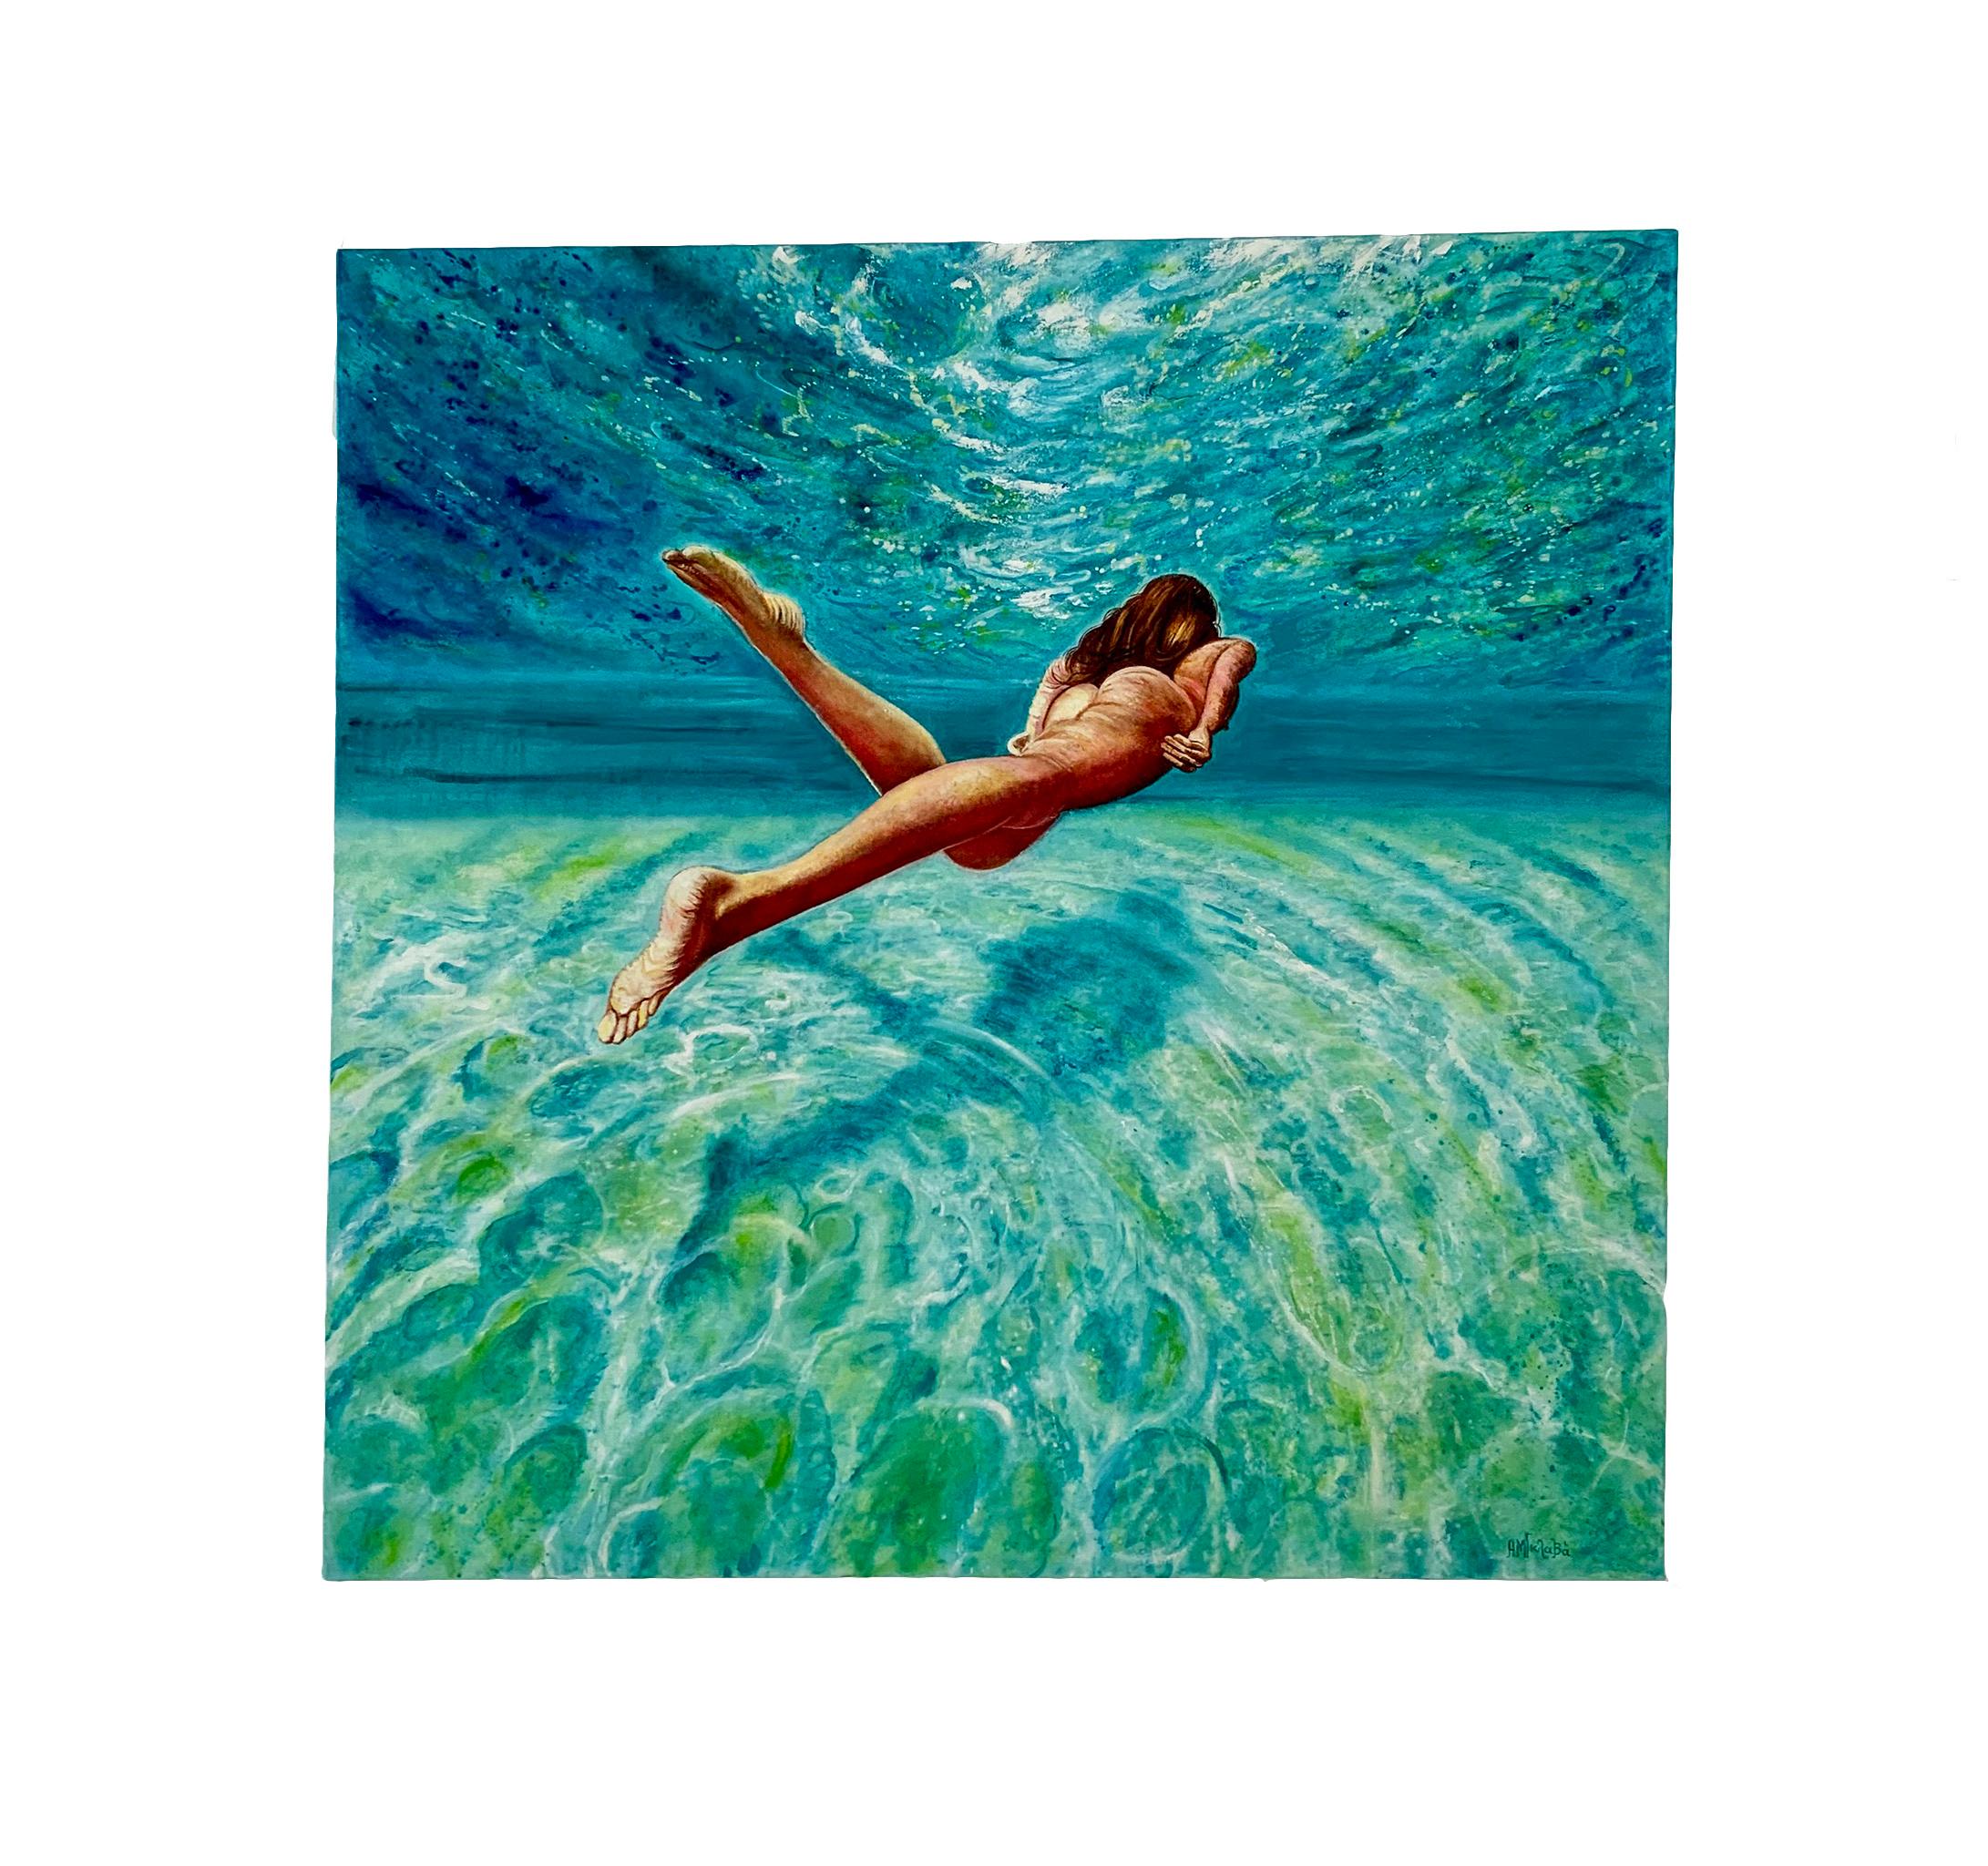 Floating Weightlessly - Oil painting of nude female swimmer, turquoise sea water